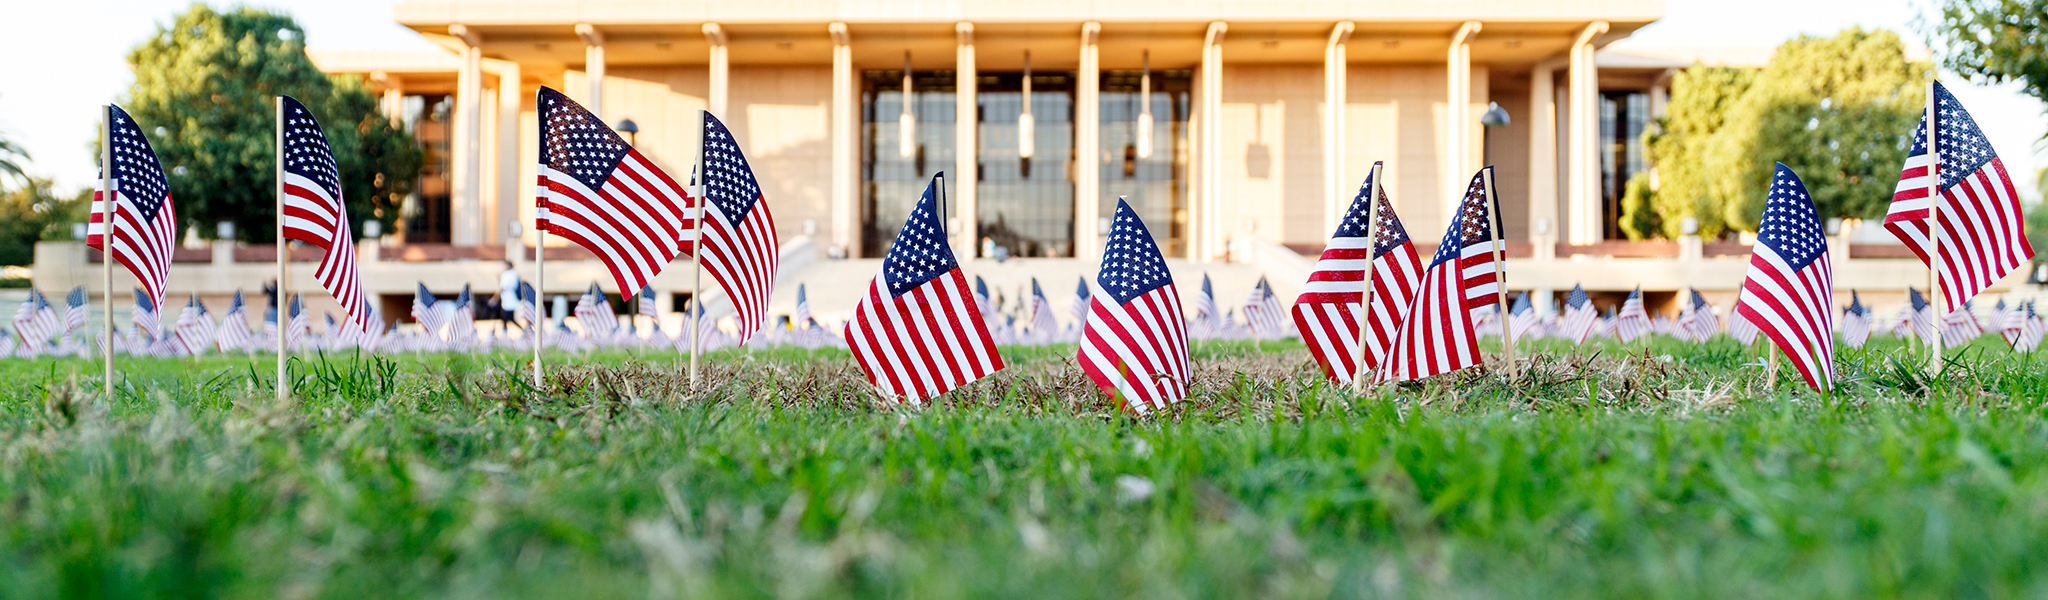 Flags in front of the Oviatt Library in observance of Veterans Day